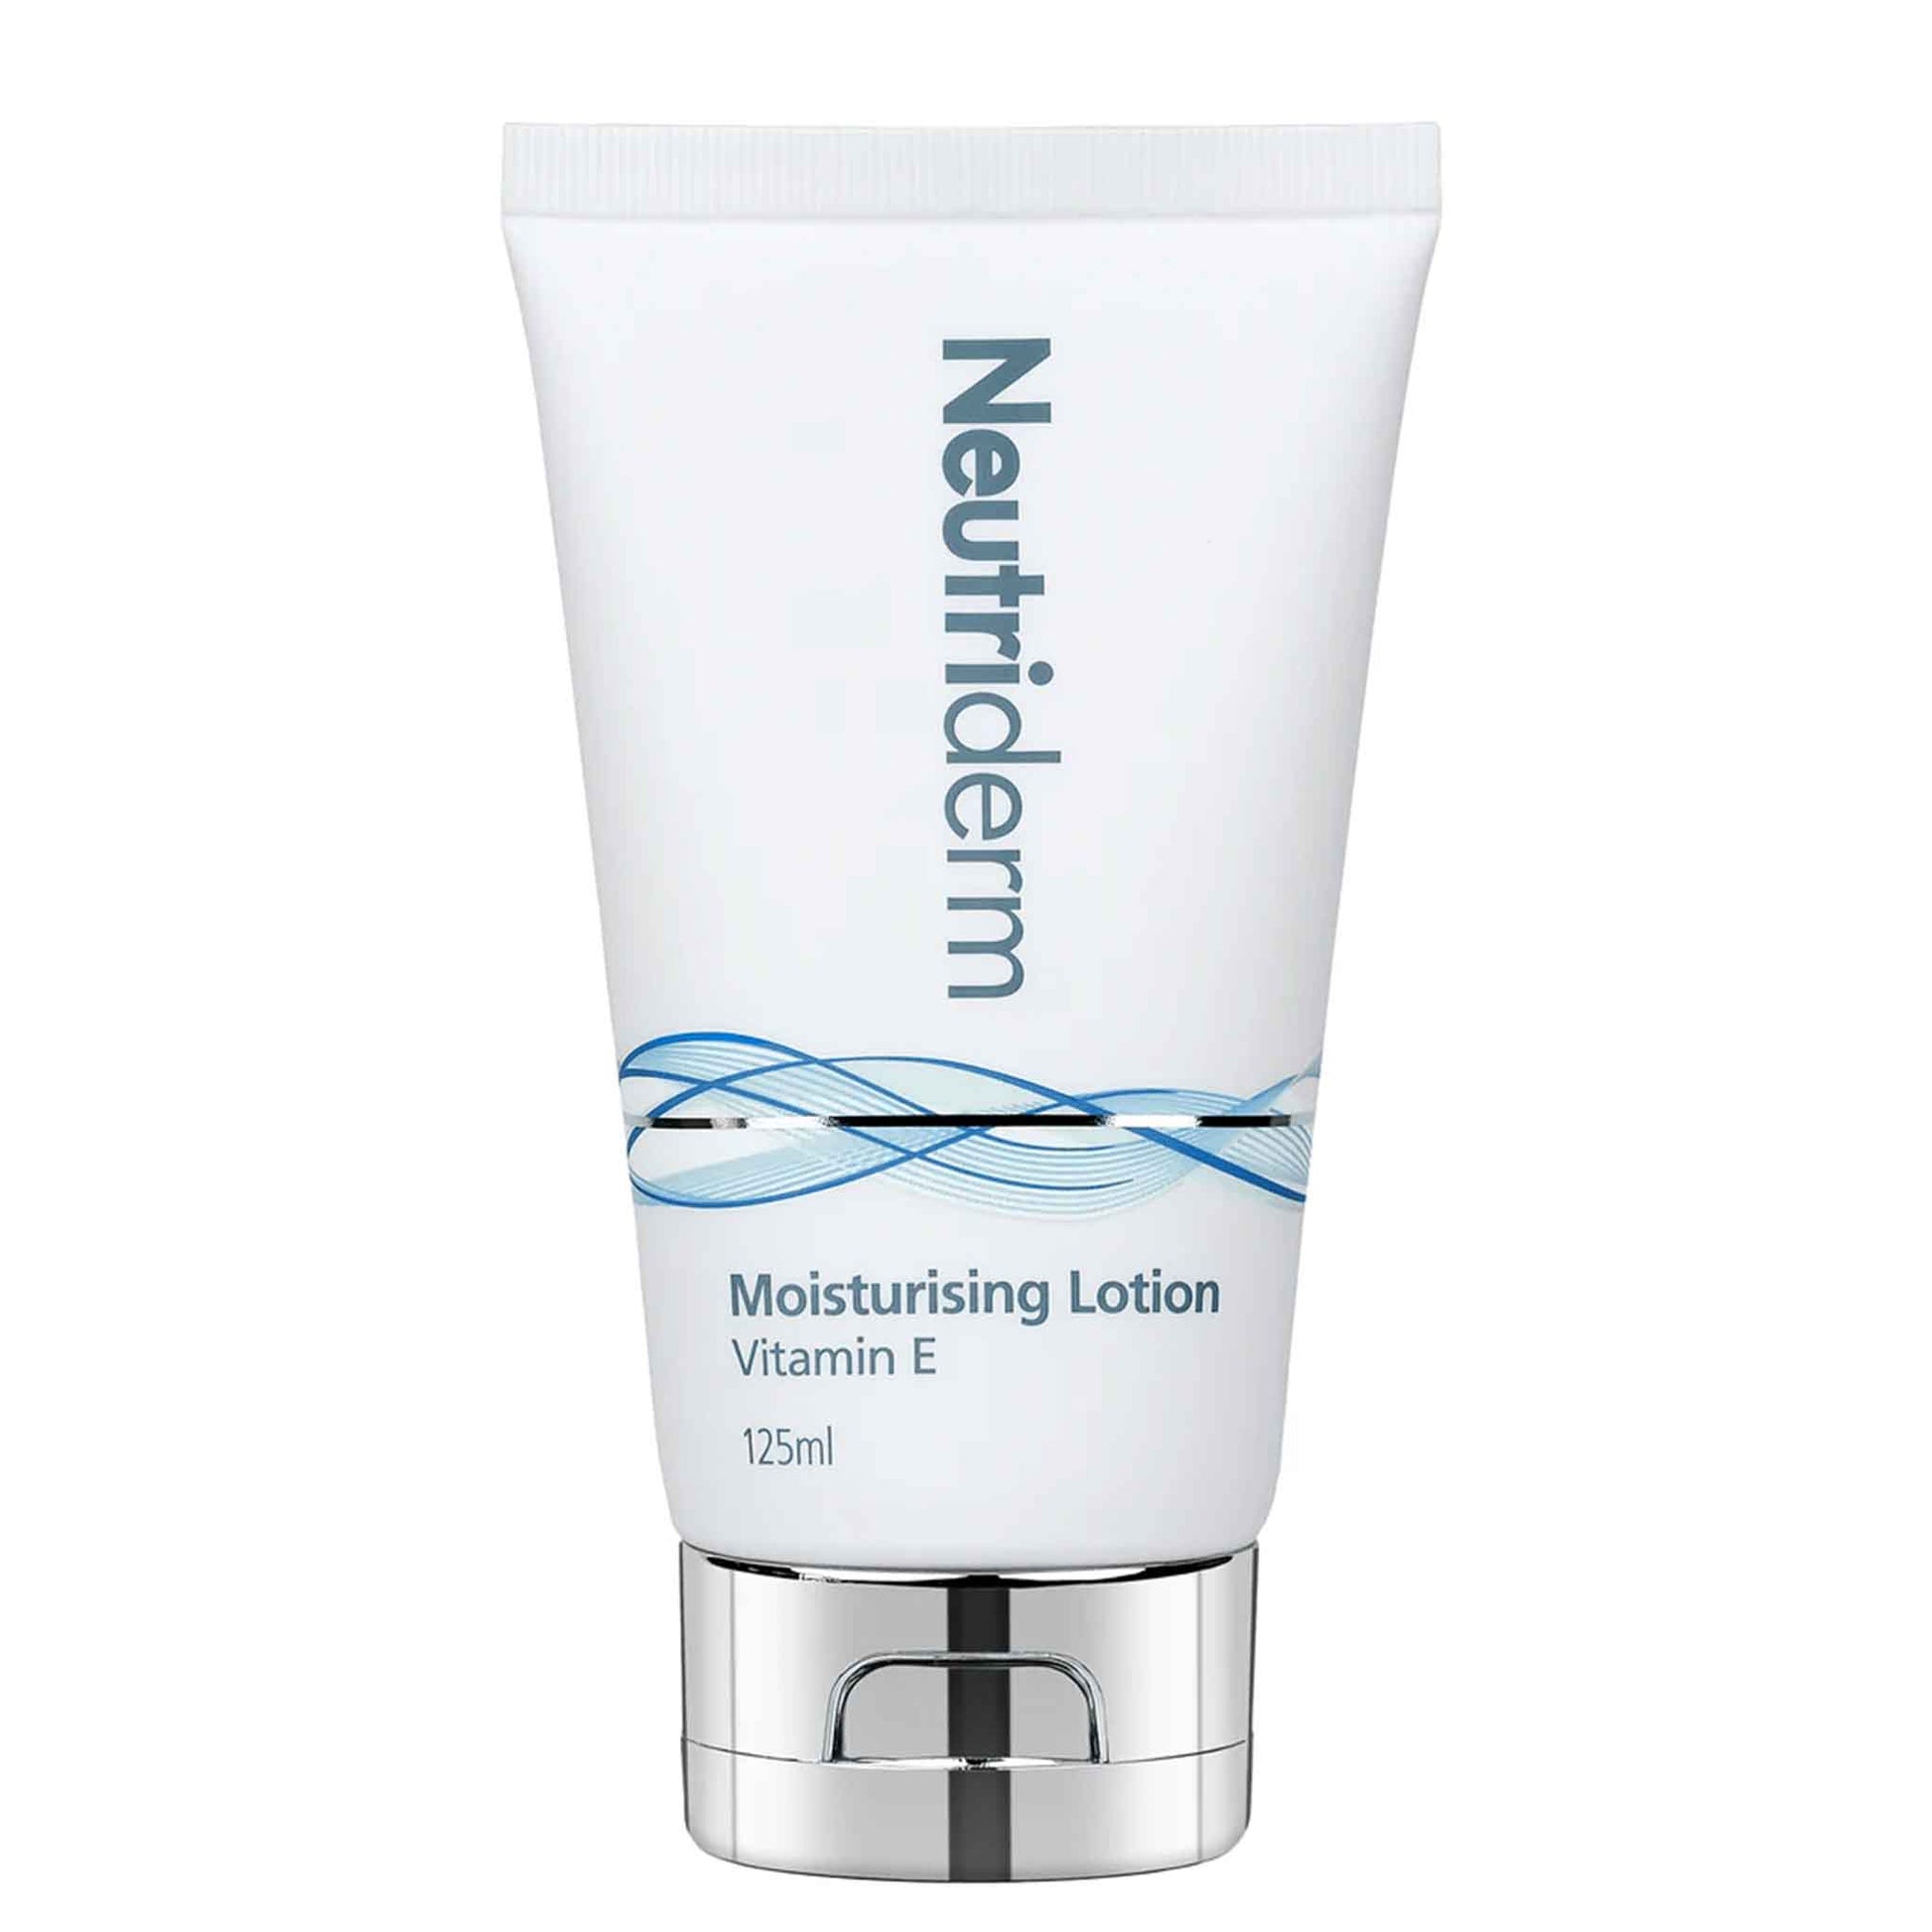 Neutriderm Moisturising Lotion contains a special type of Vitamin E that is retained in the skin and keeps releasing its benefits longer than any other Vitamin E cream or lotion